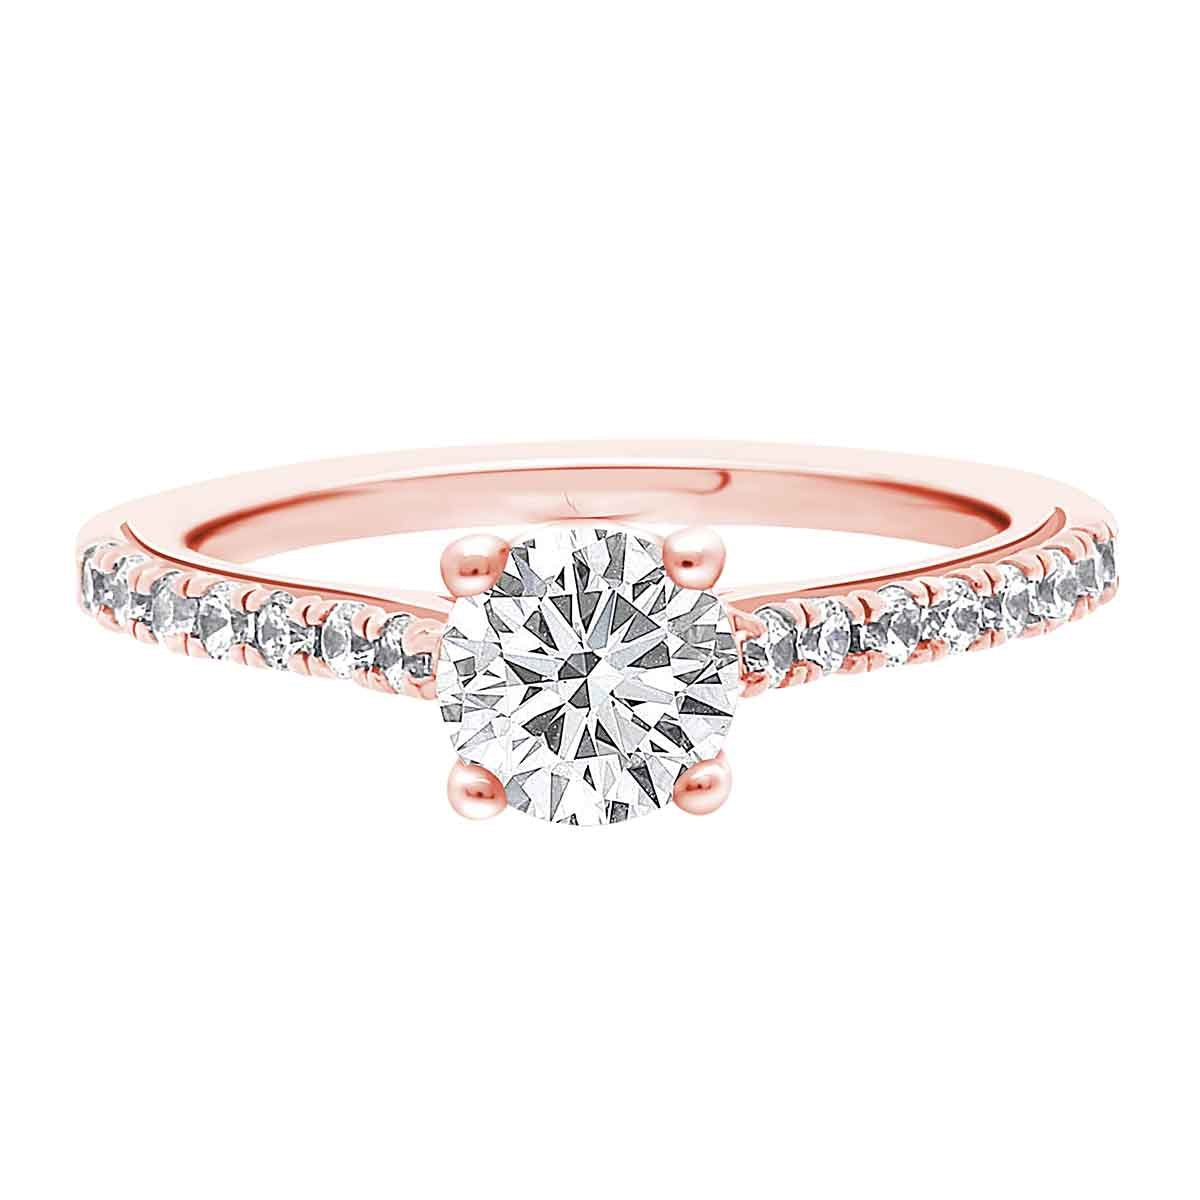 Castell Set Diamond Ring made from rose gold